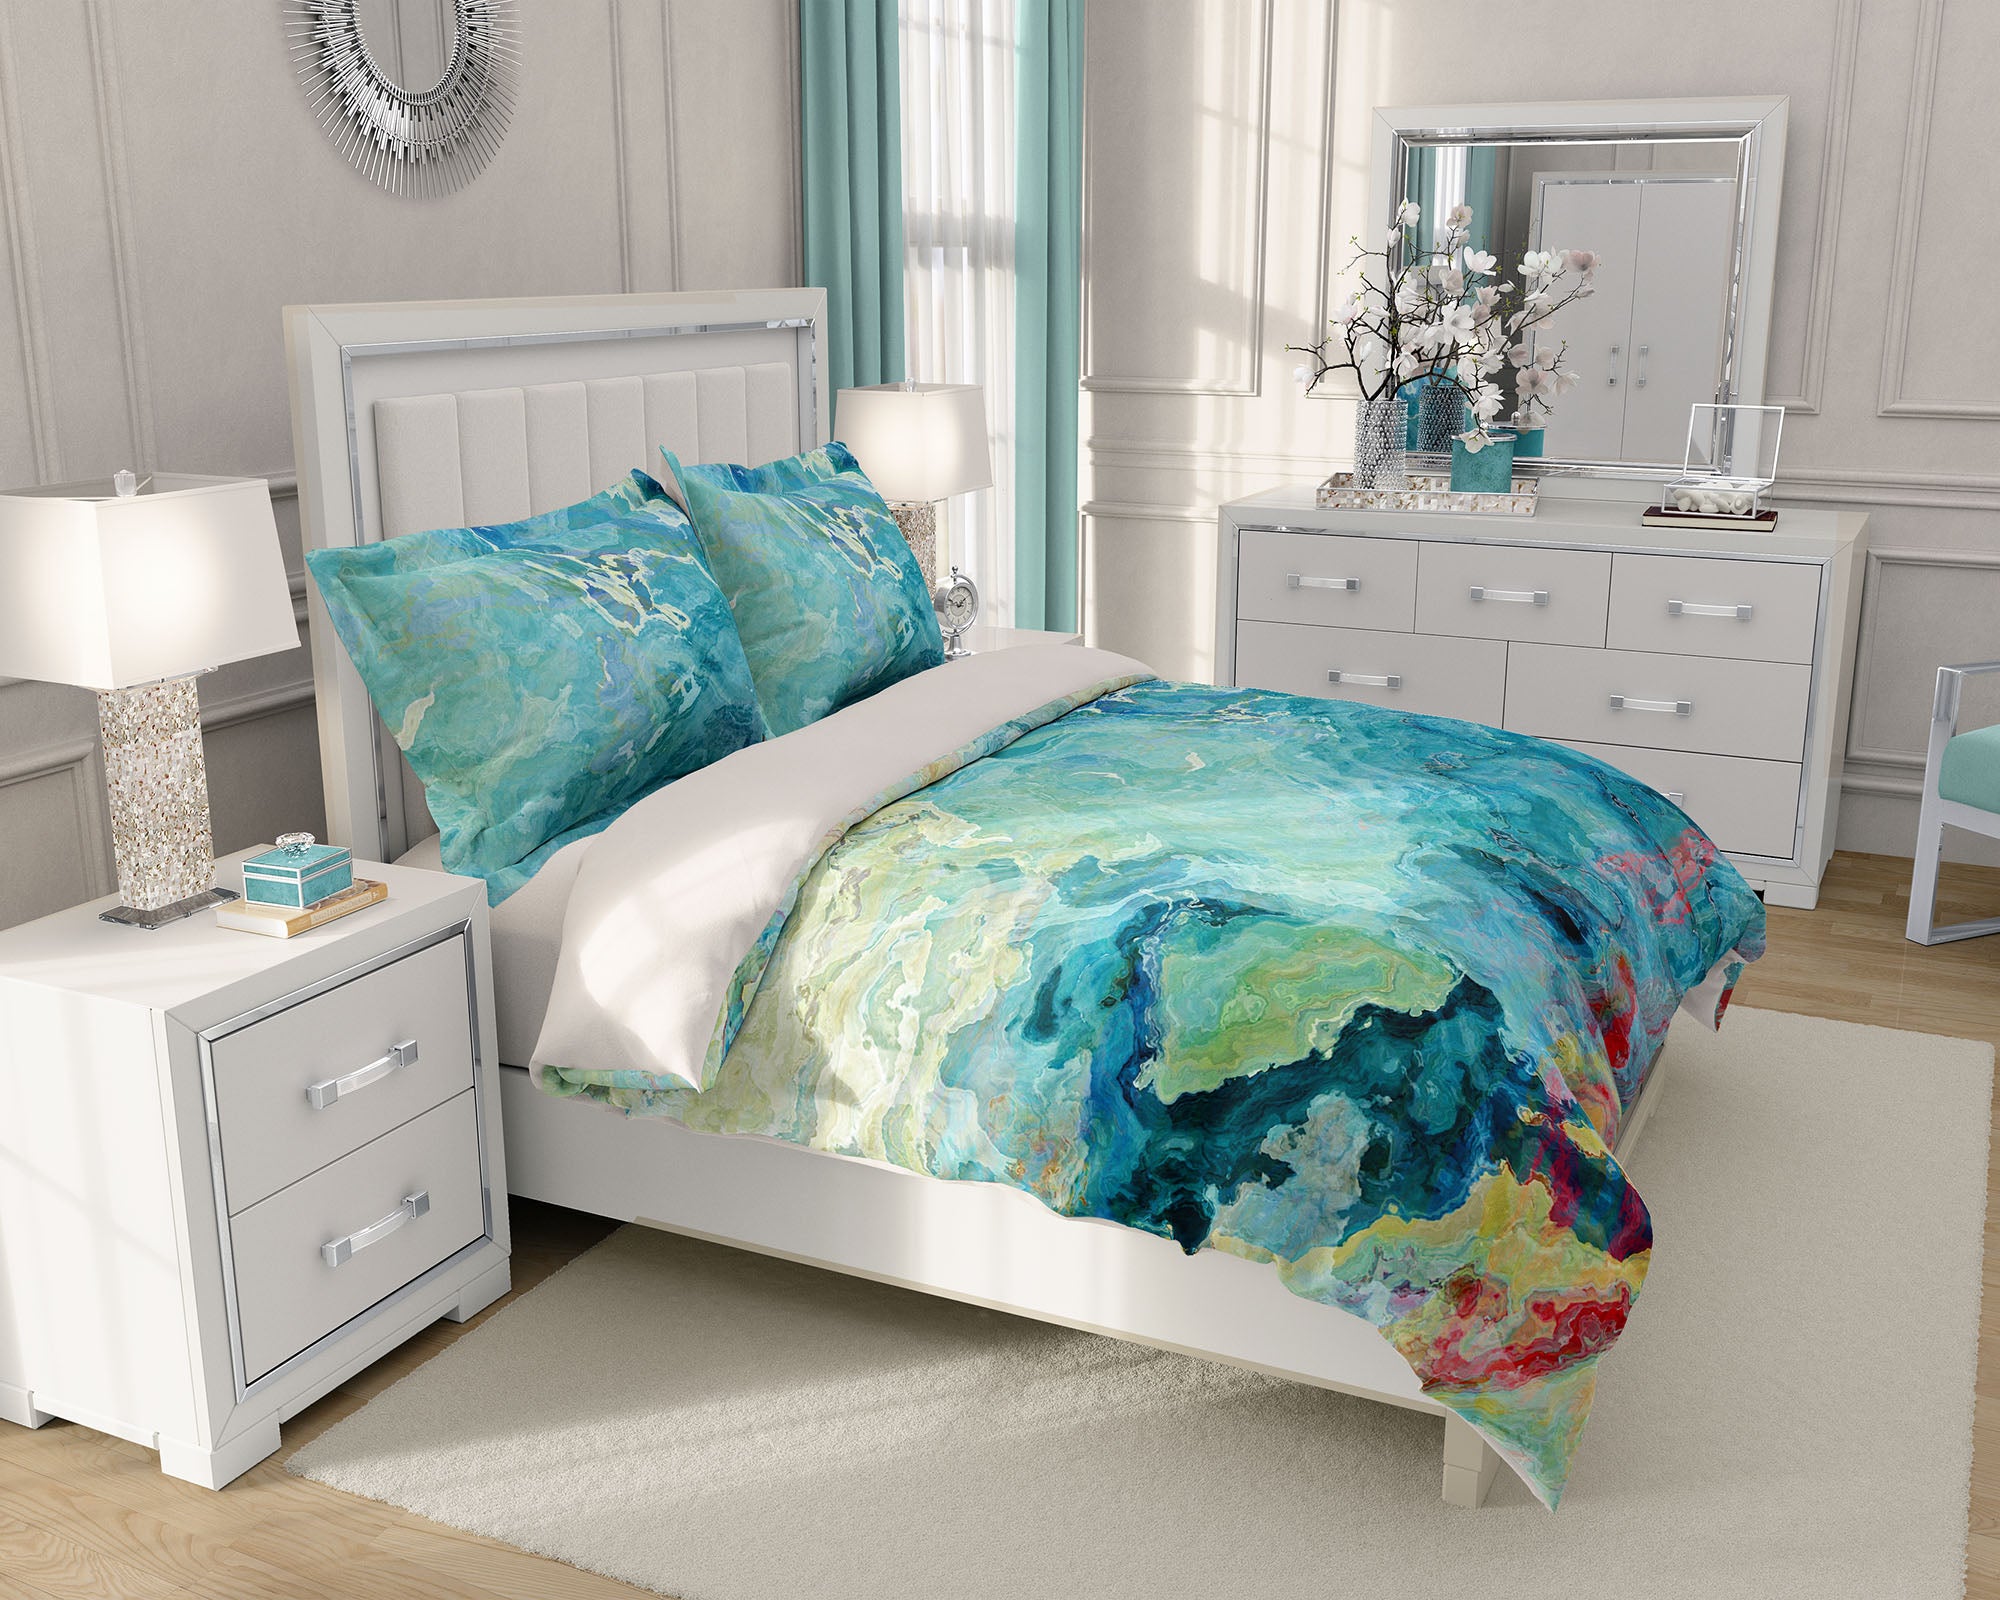 Duvet Cover With Abstract Art King Or Queen Aqua Blue Green